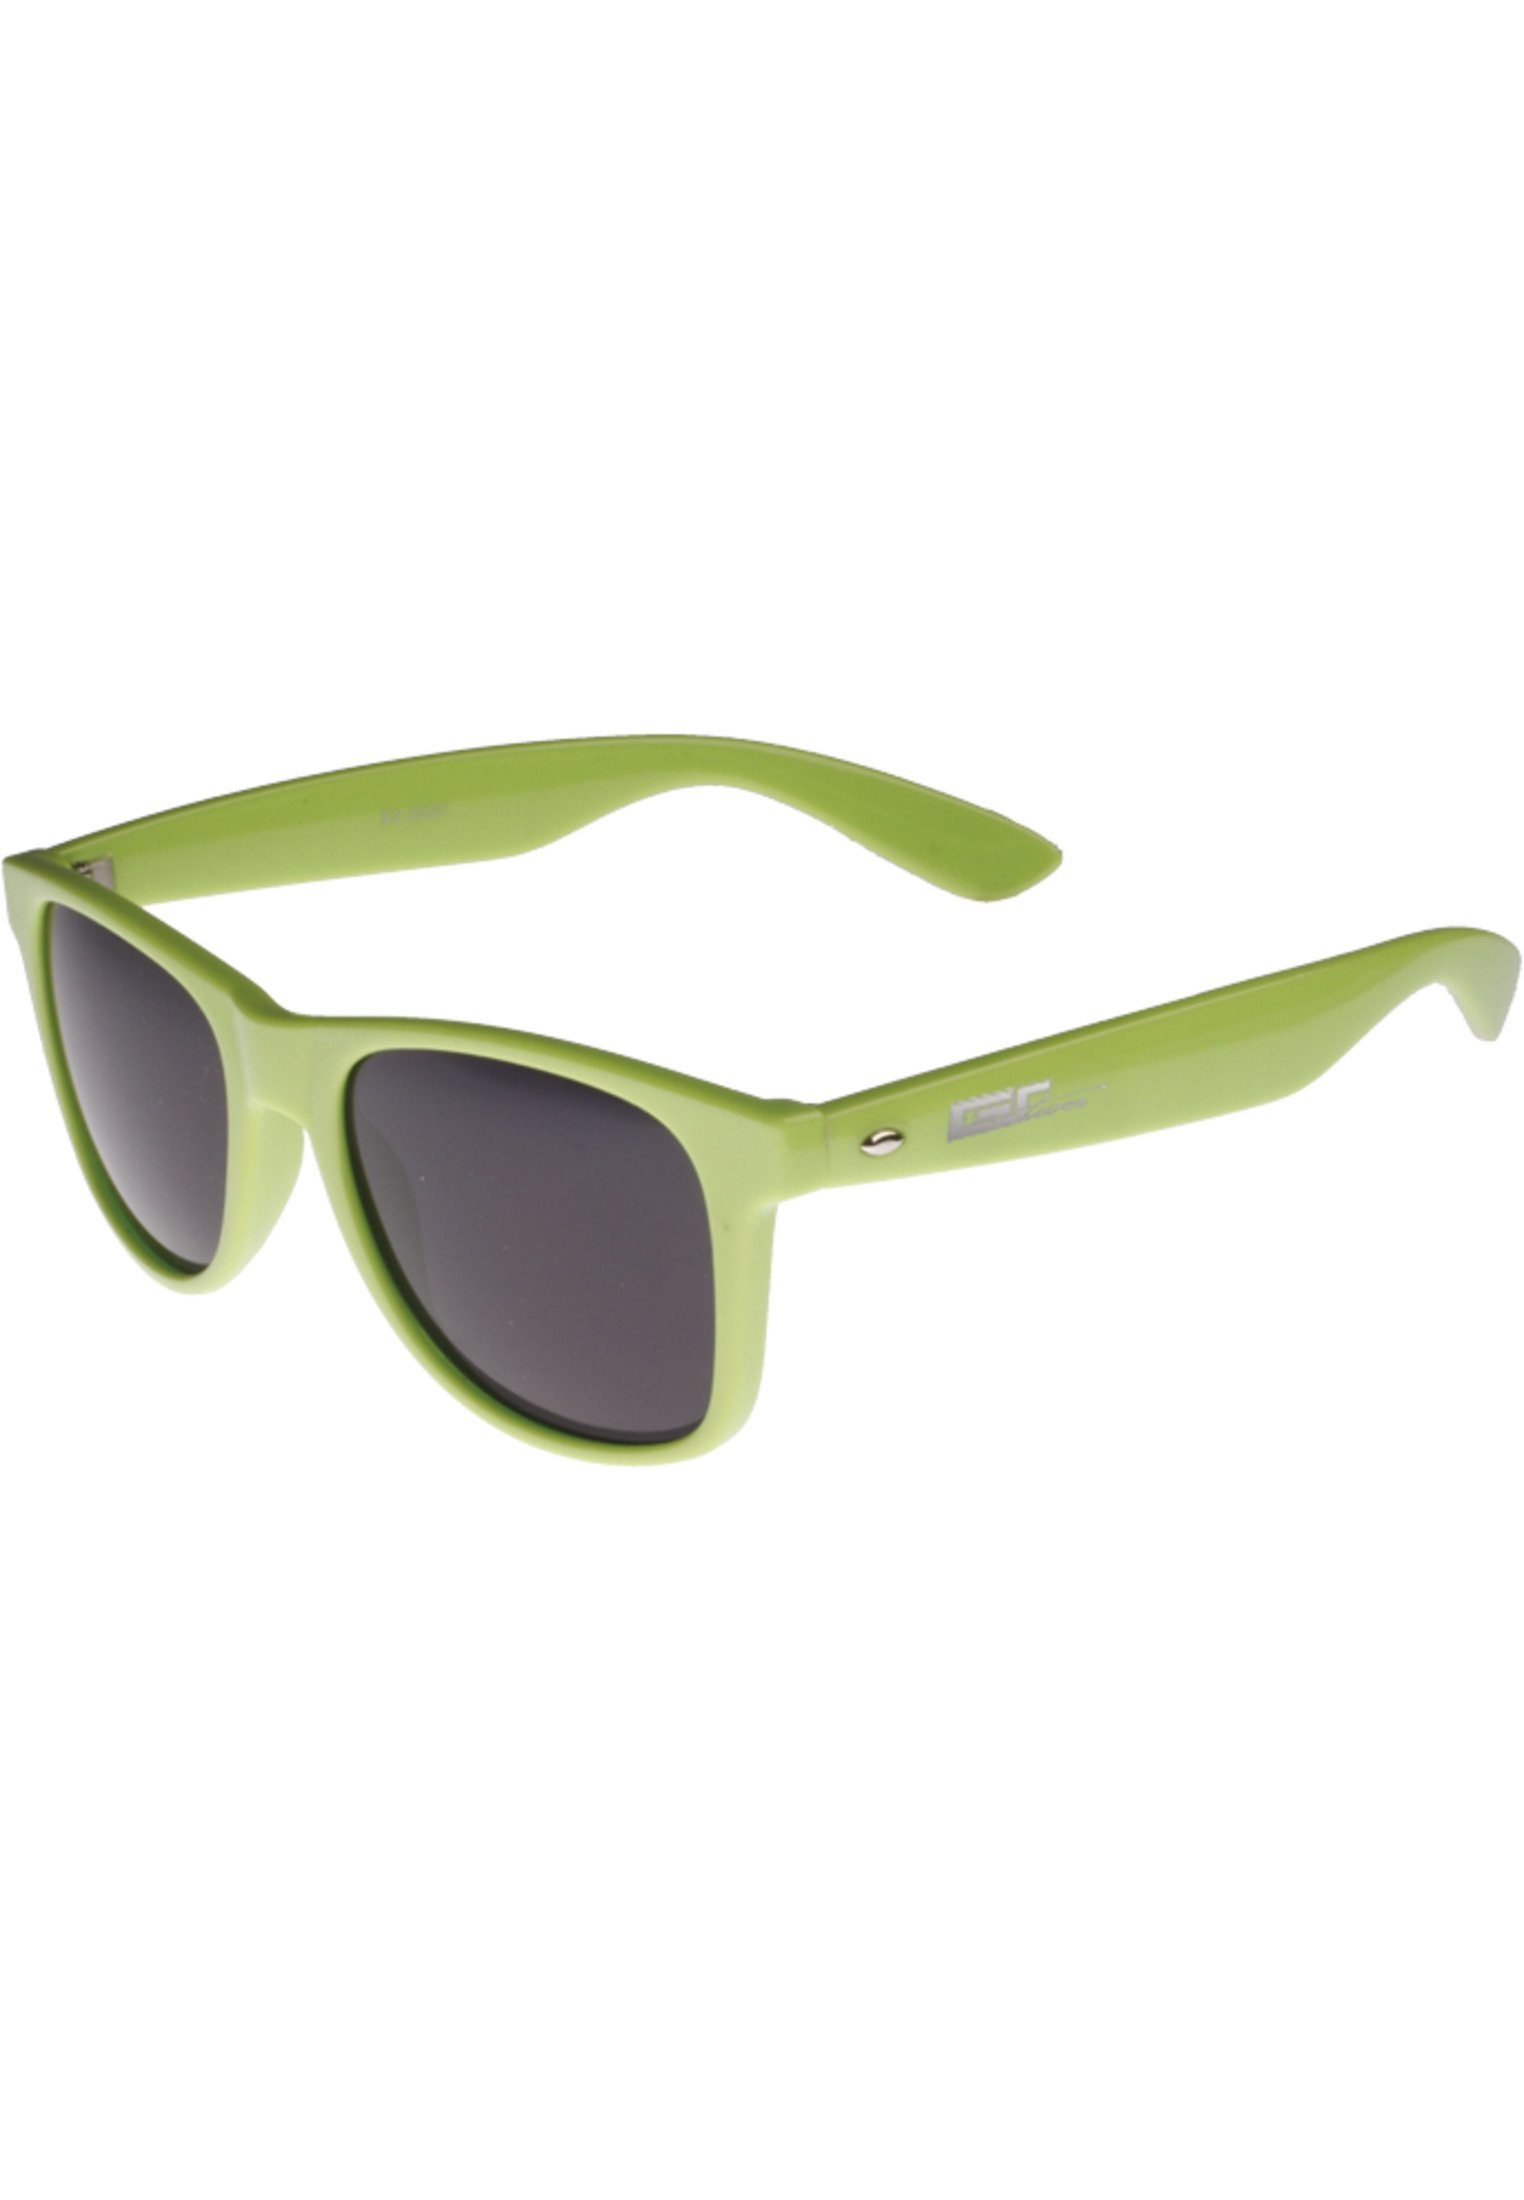 MSTRDS Sonnenbrille Accessoires Groove Shades GStwo limegreen